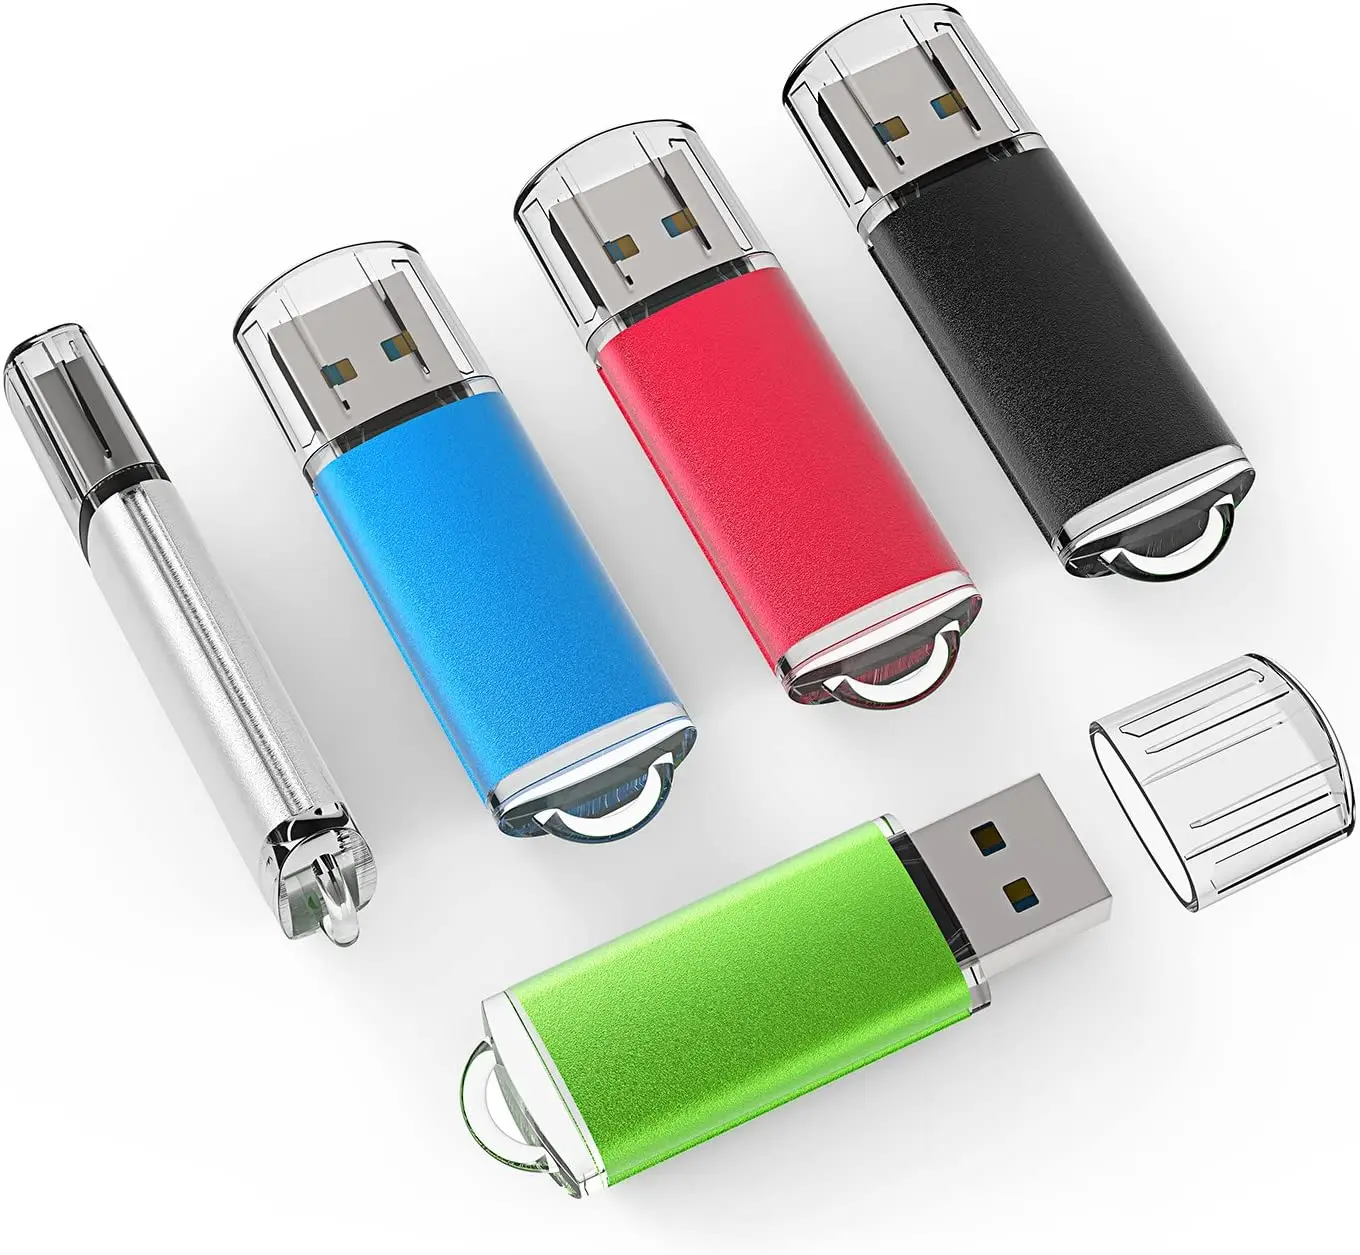 erektion Ansøgning smør Wholesale Competitive Price Usb 2.0 Usb 3.0 1gb 2gb 4gb 8 Gb 16 Gb 32gb  64gb Usb Flash Drive With Customized Logo From m.alibaba.com